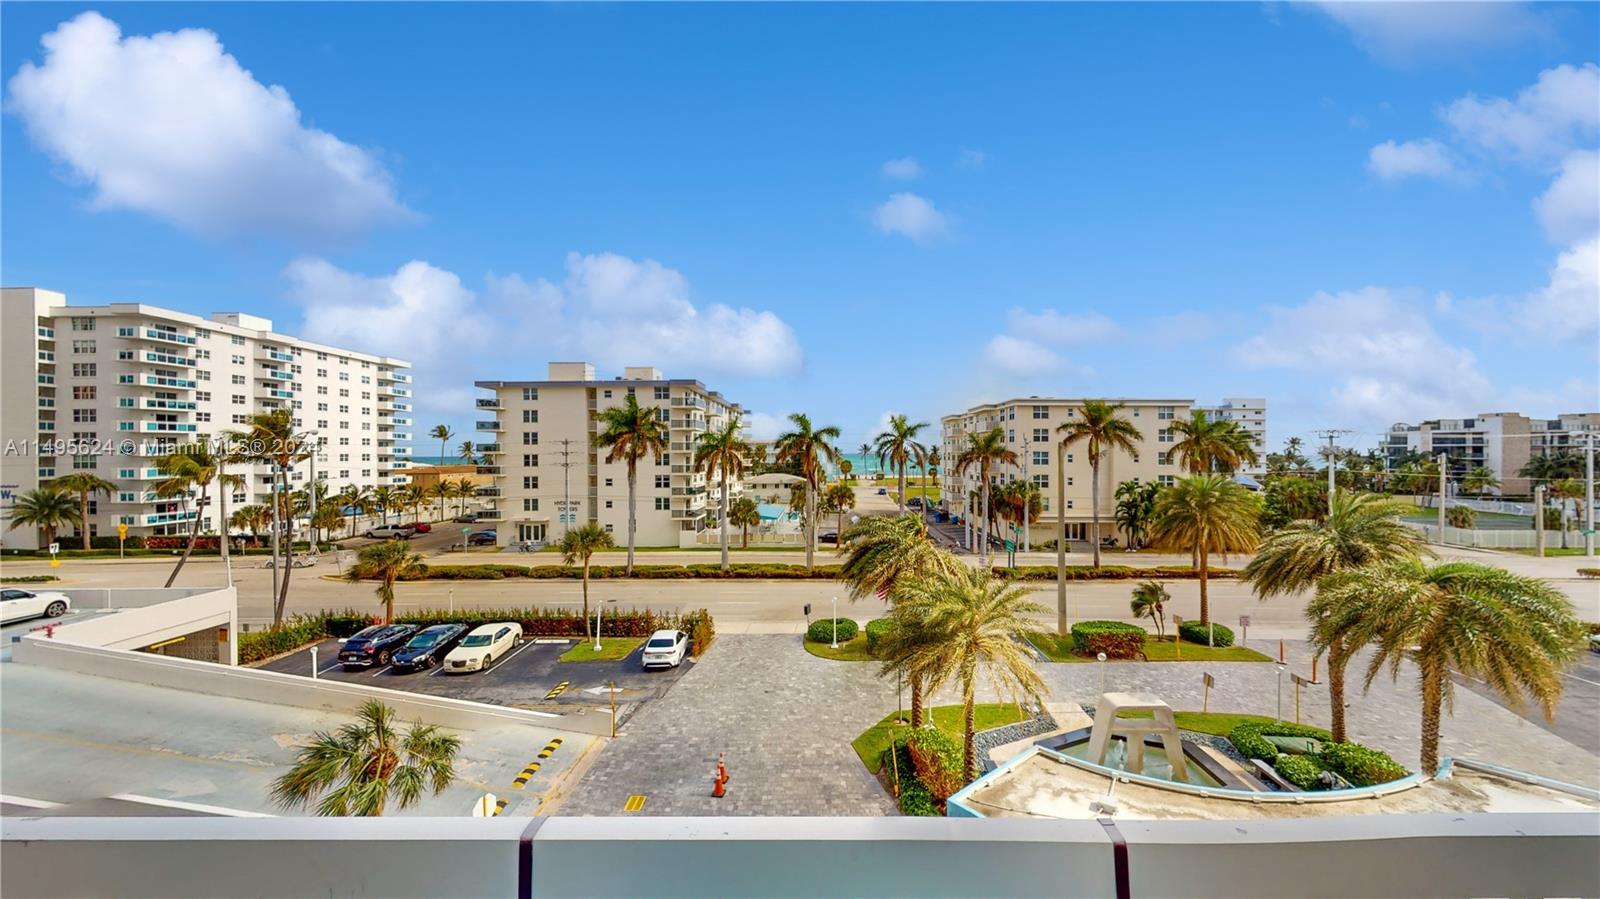 Photo of 1500 S Ocean Dr #4H in Hollywood, FL